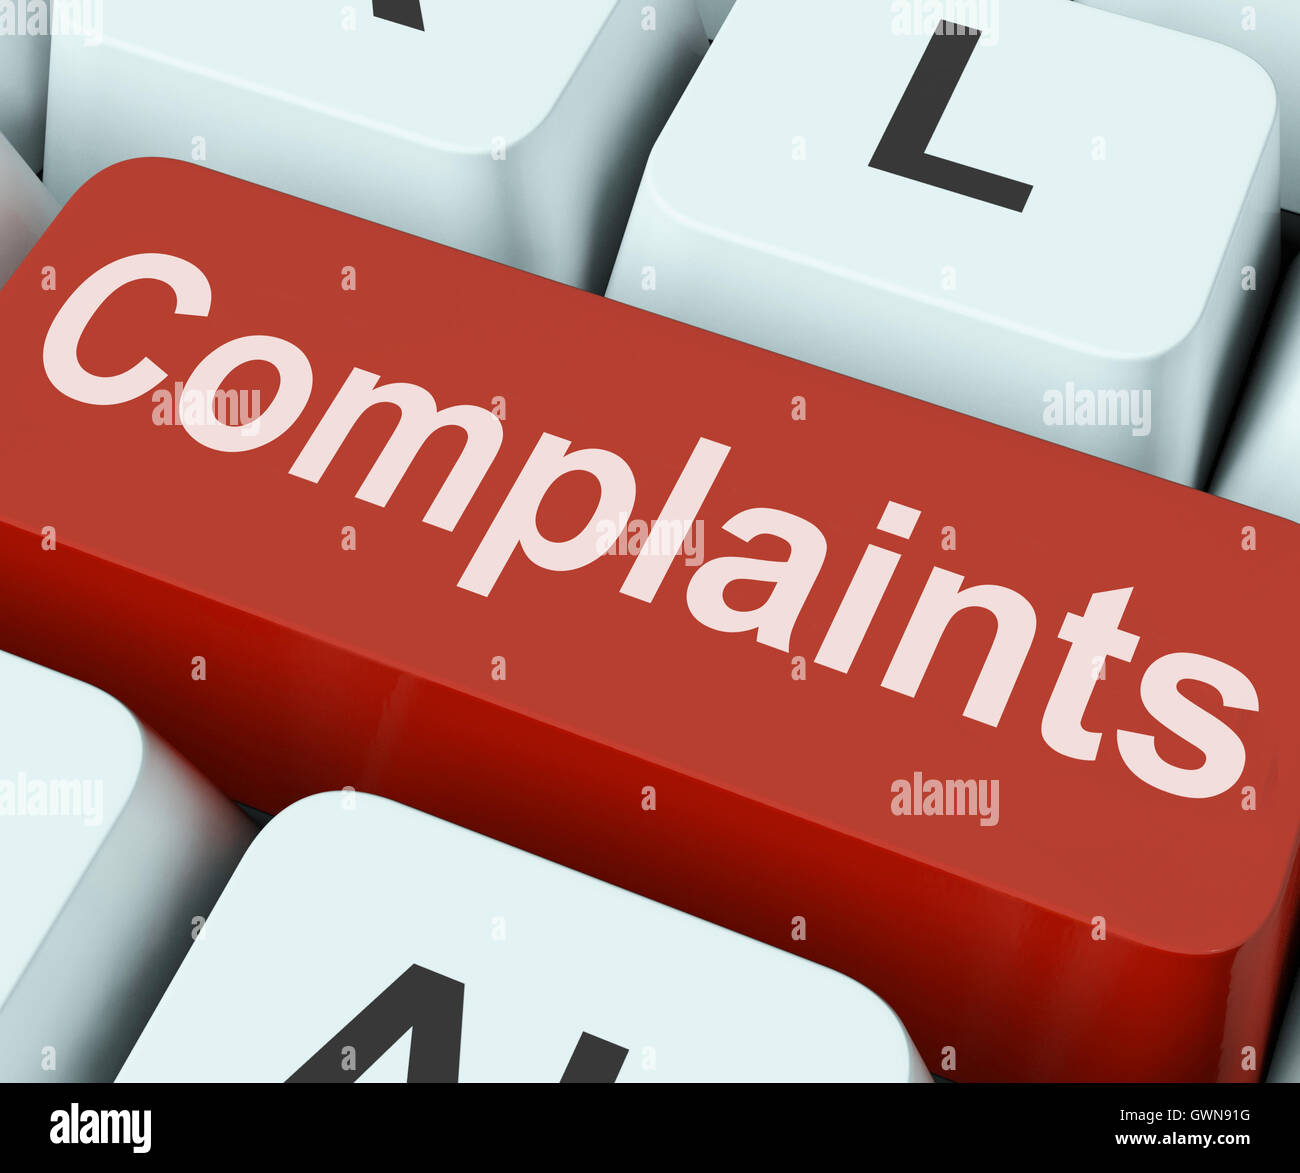 Complaints Key Shows Complaining Or Moaning Online Stock Photo